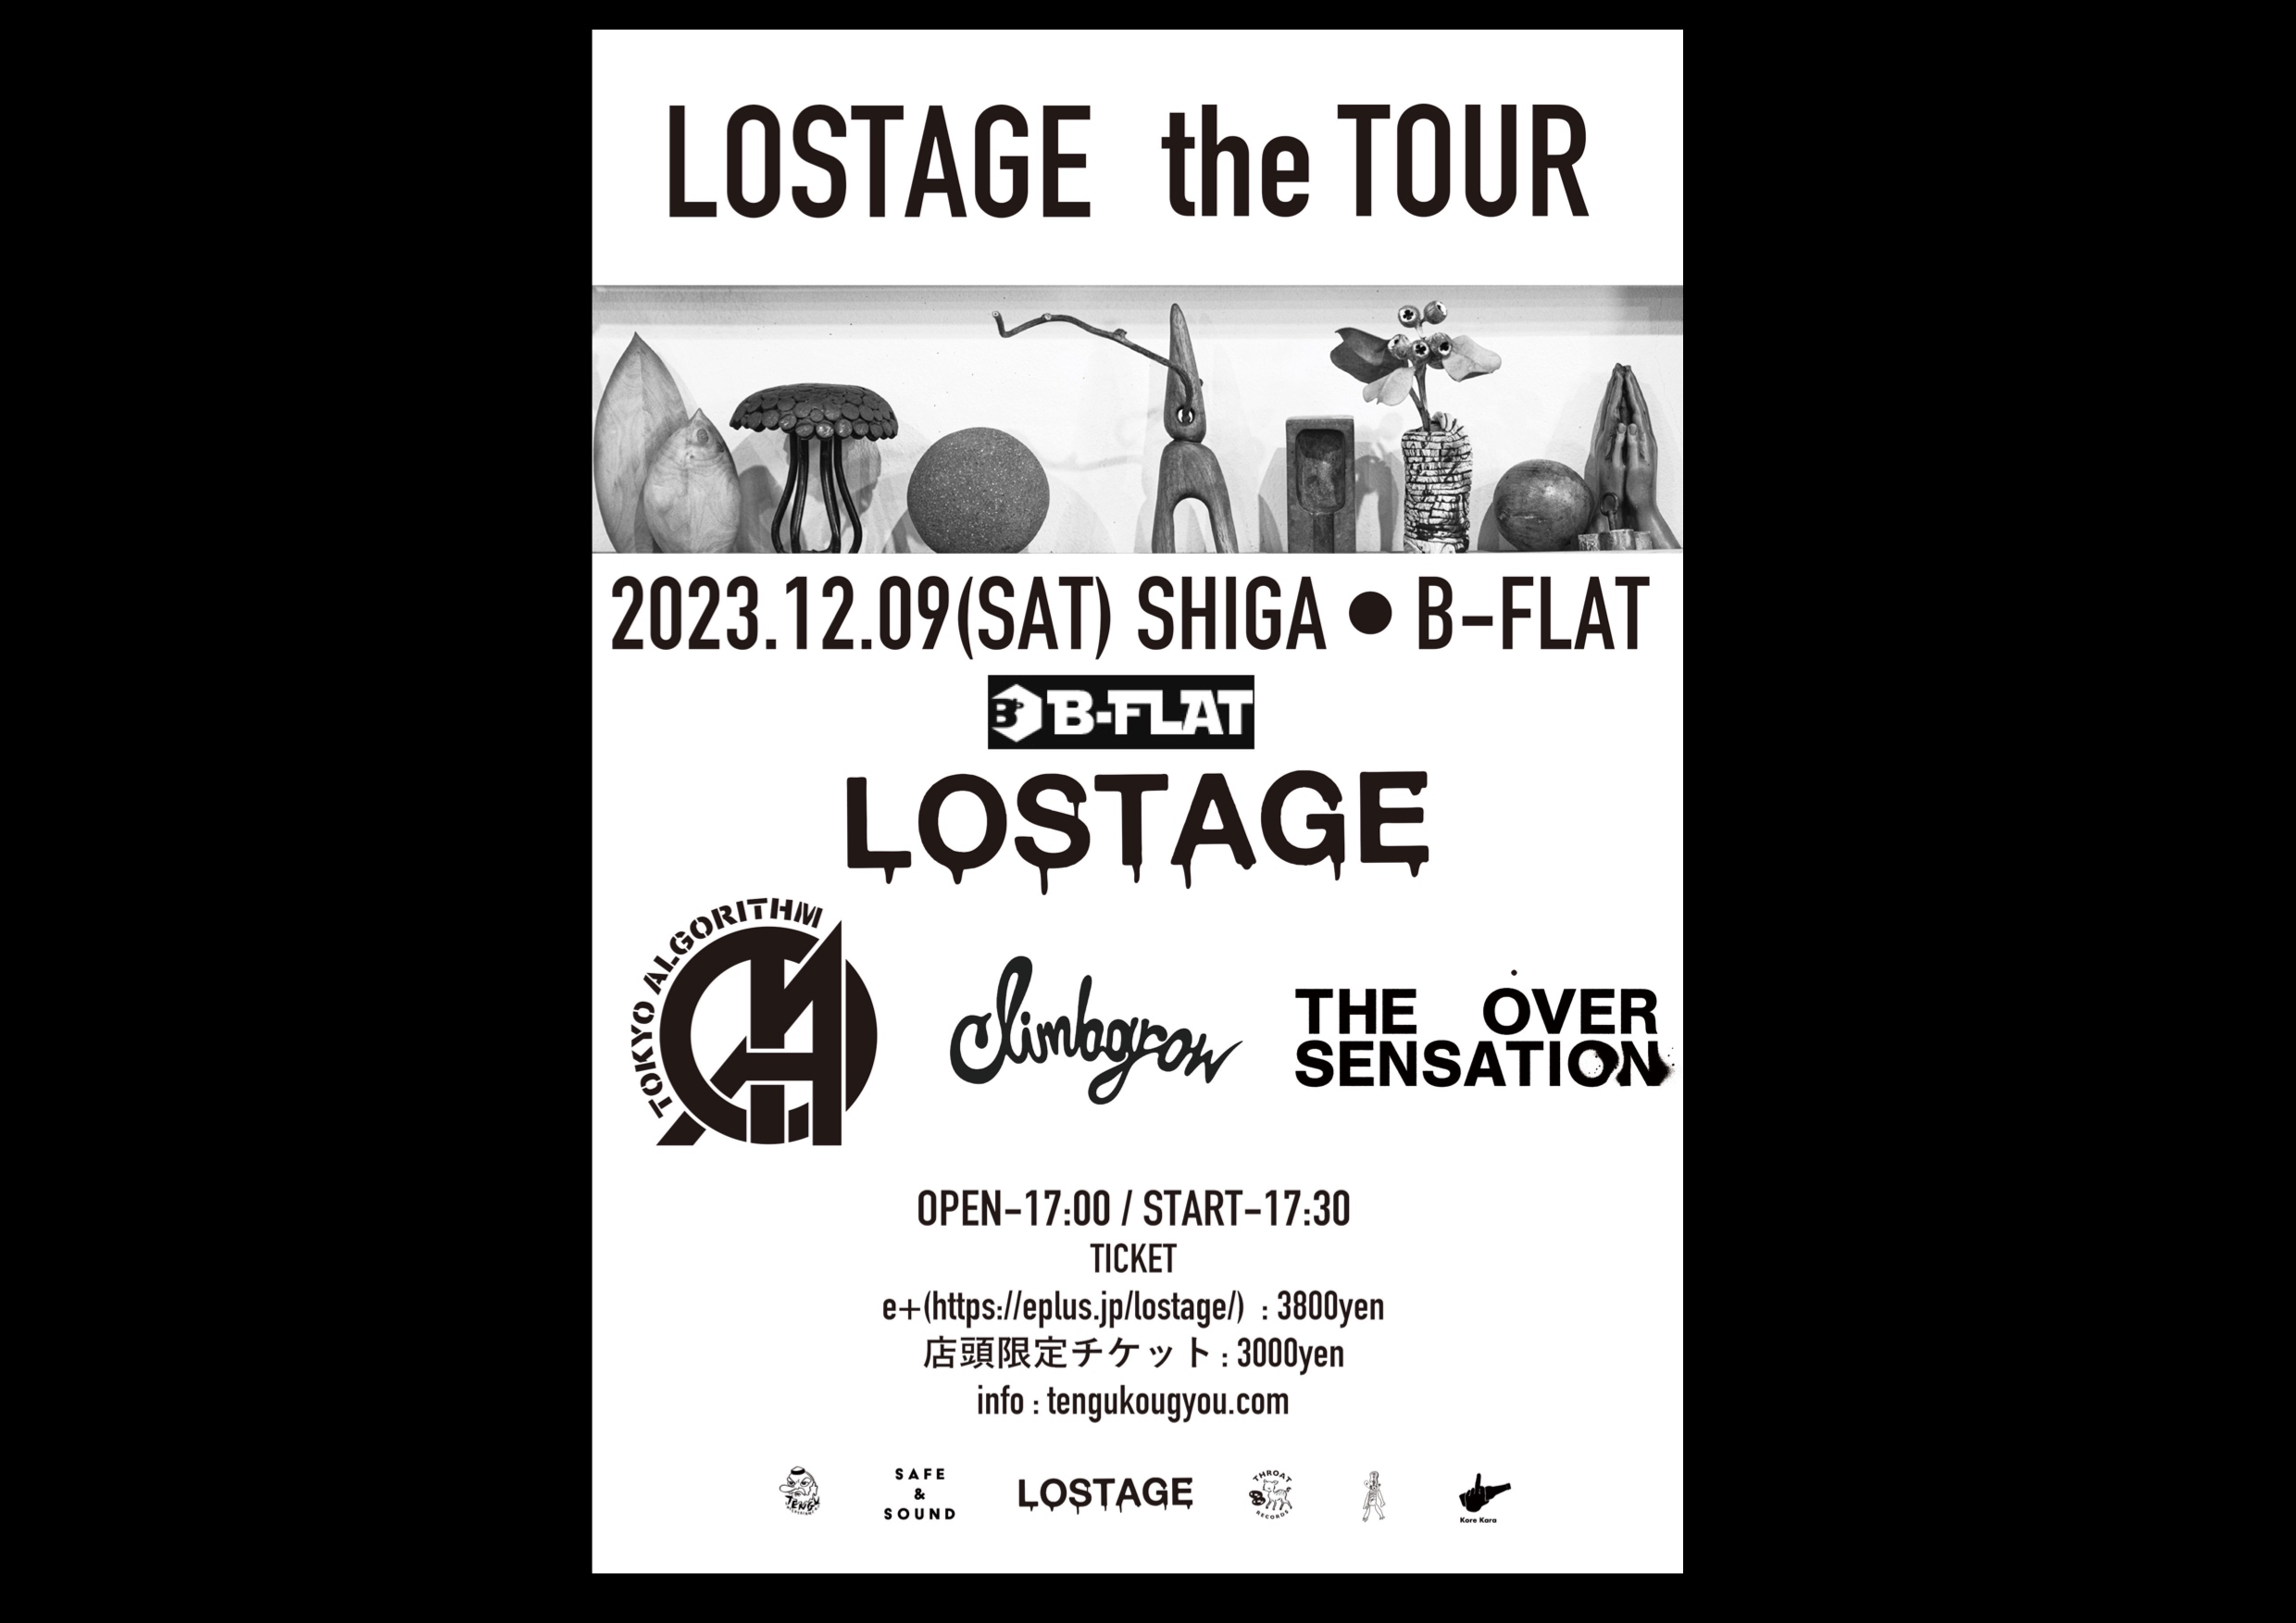 LOSTAGE the TOUR